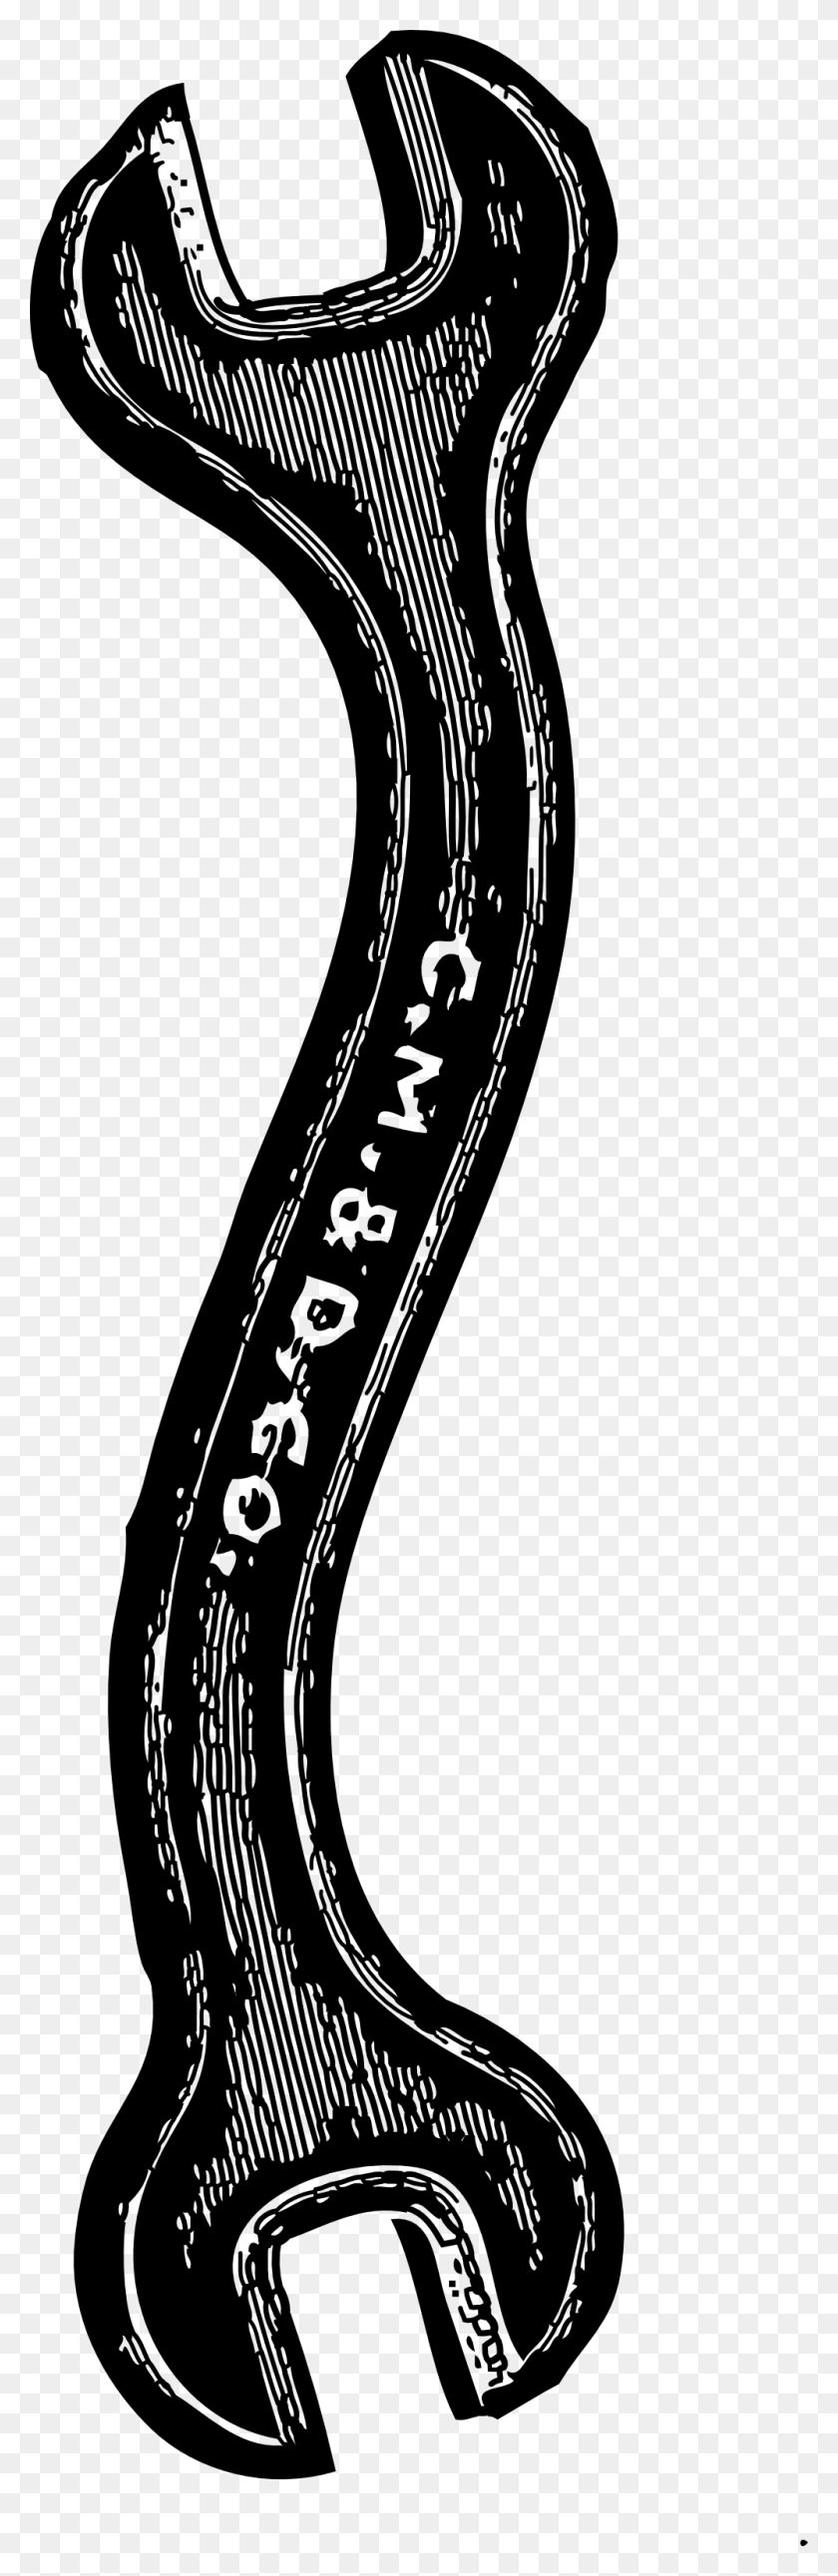 999x3232 Open End Wrench Clip Art, Open End Wrench Drawing - Wrench Clipart